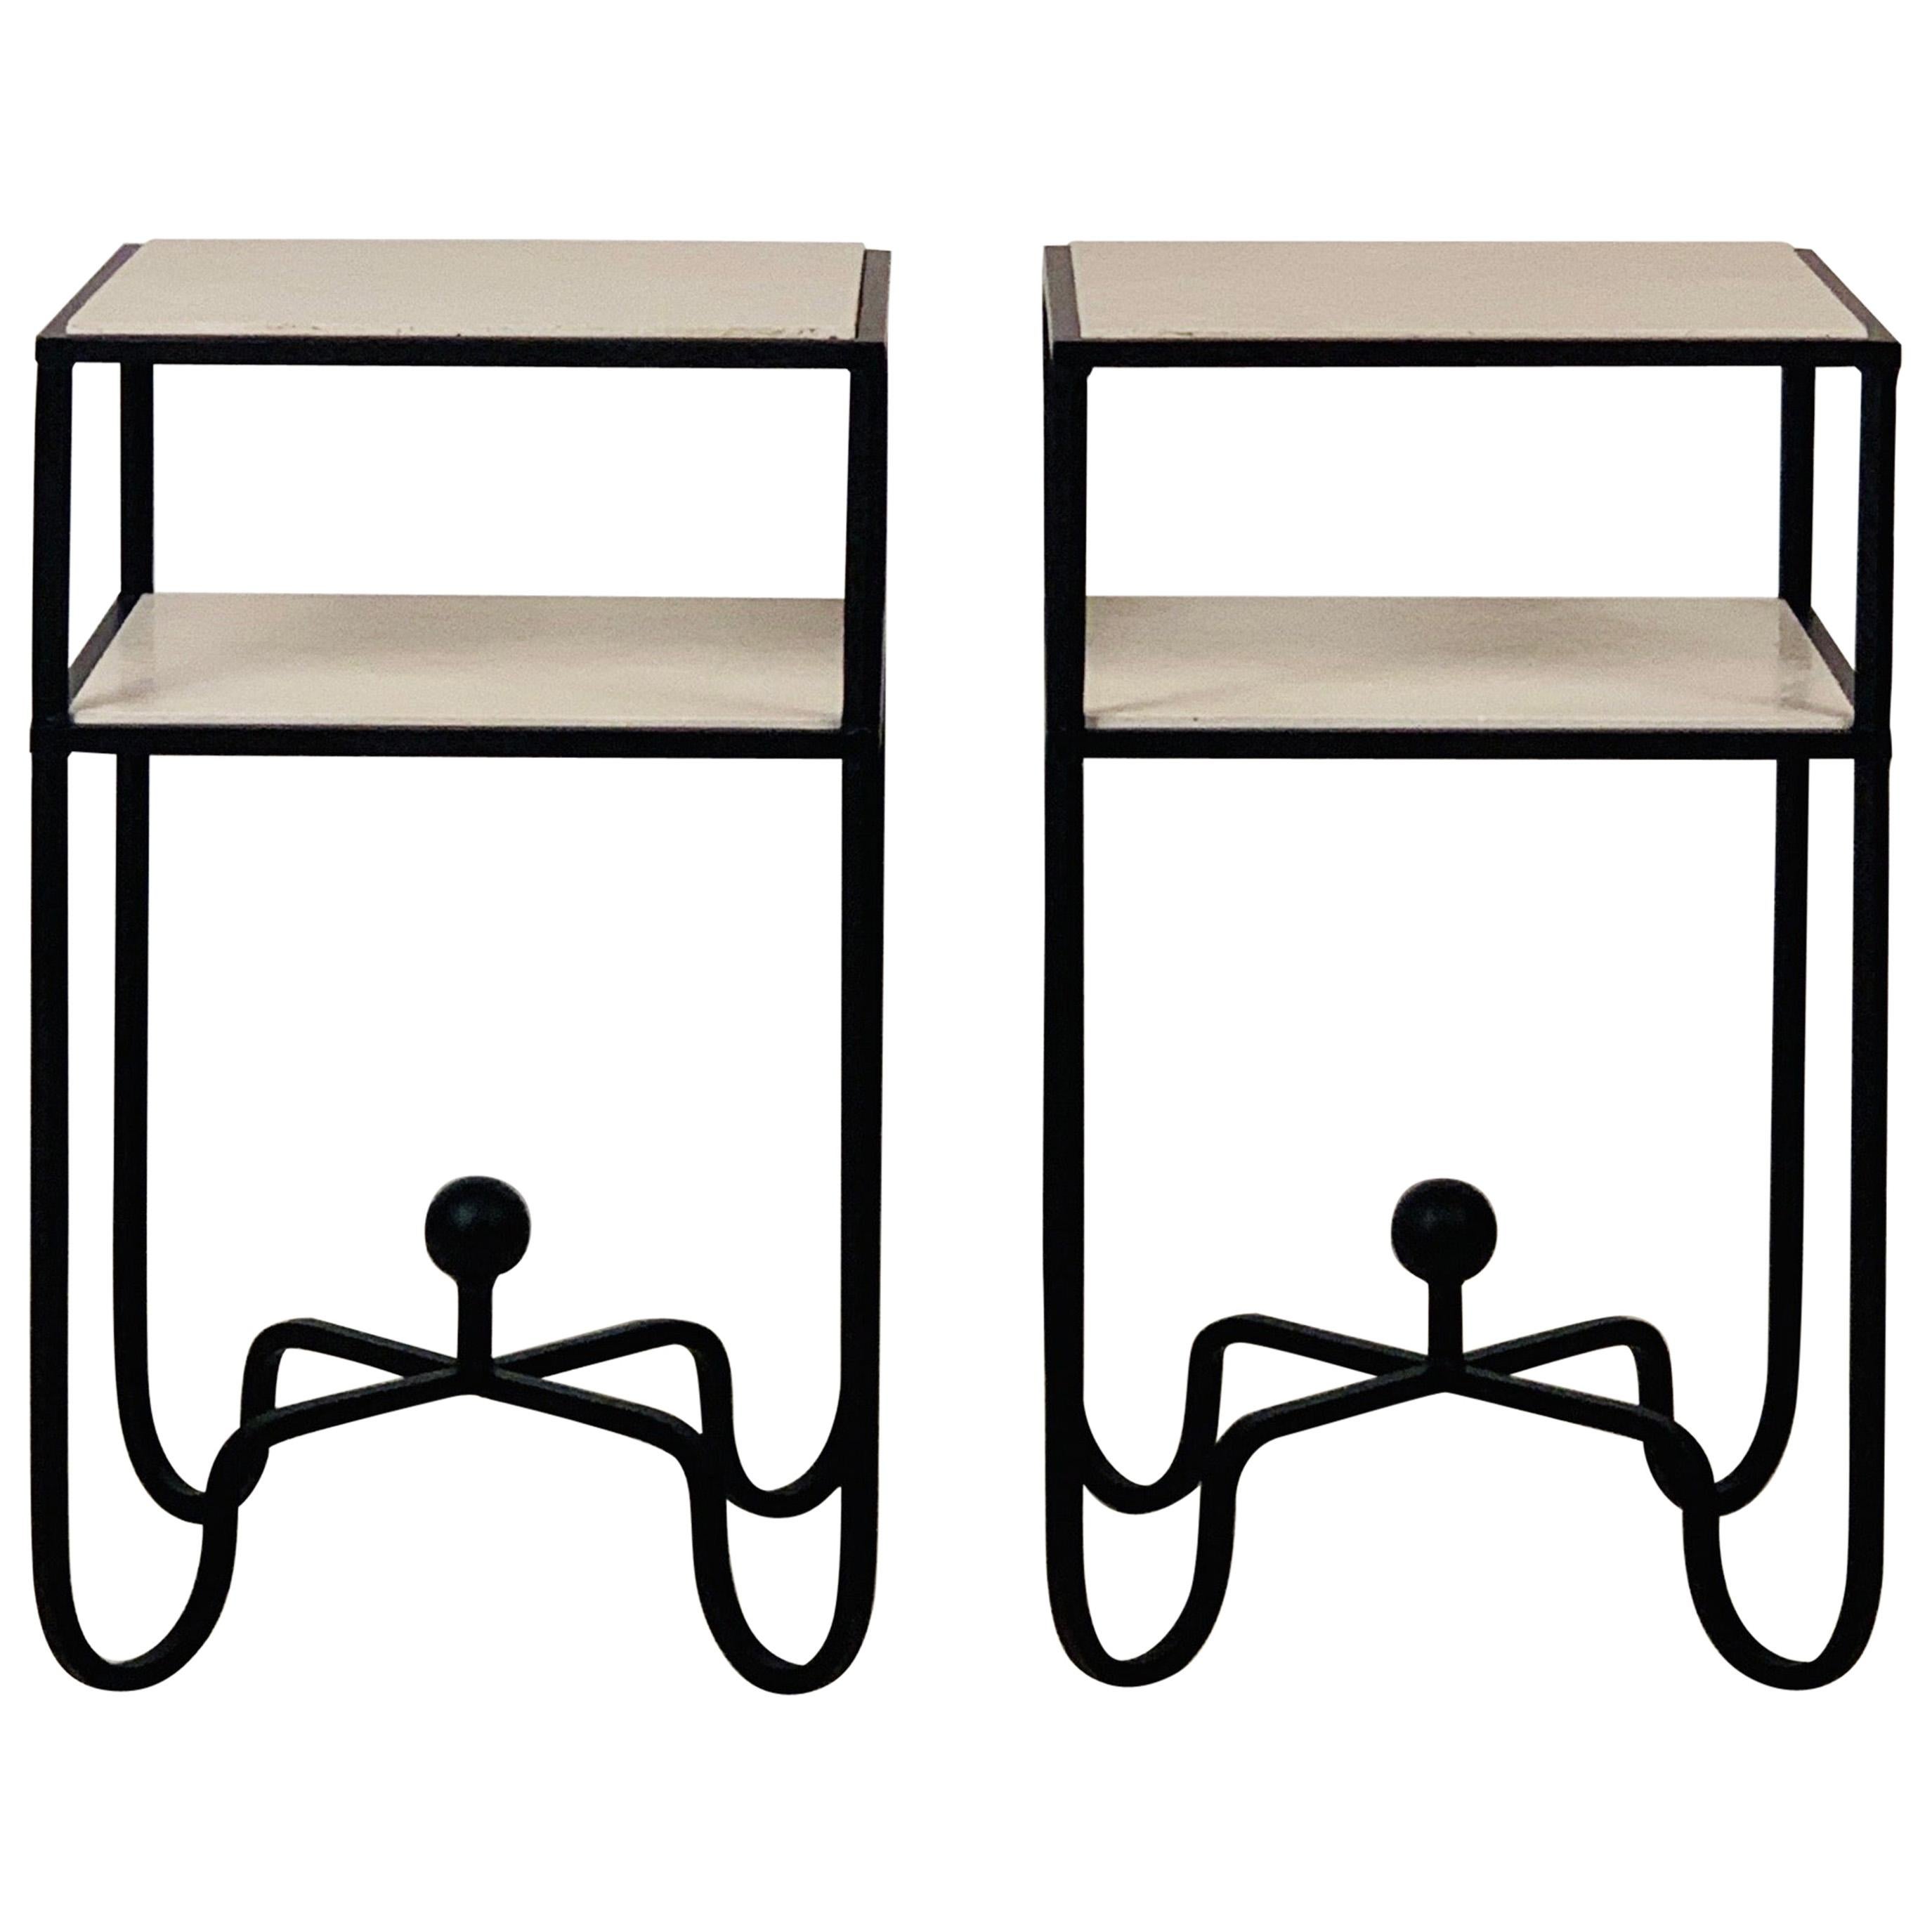 Pair of 2-Tier Entretoise Side Tables by Design Frères